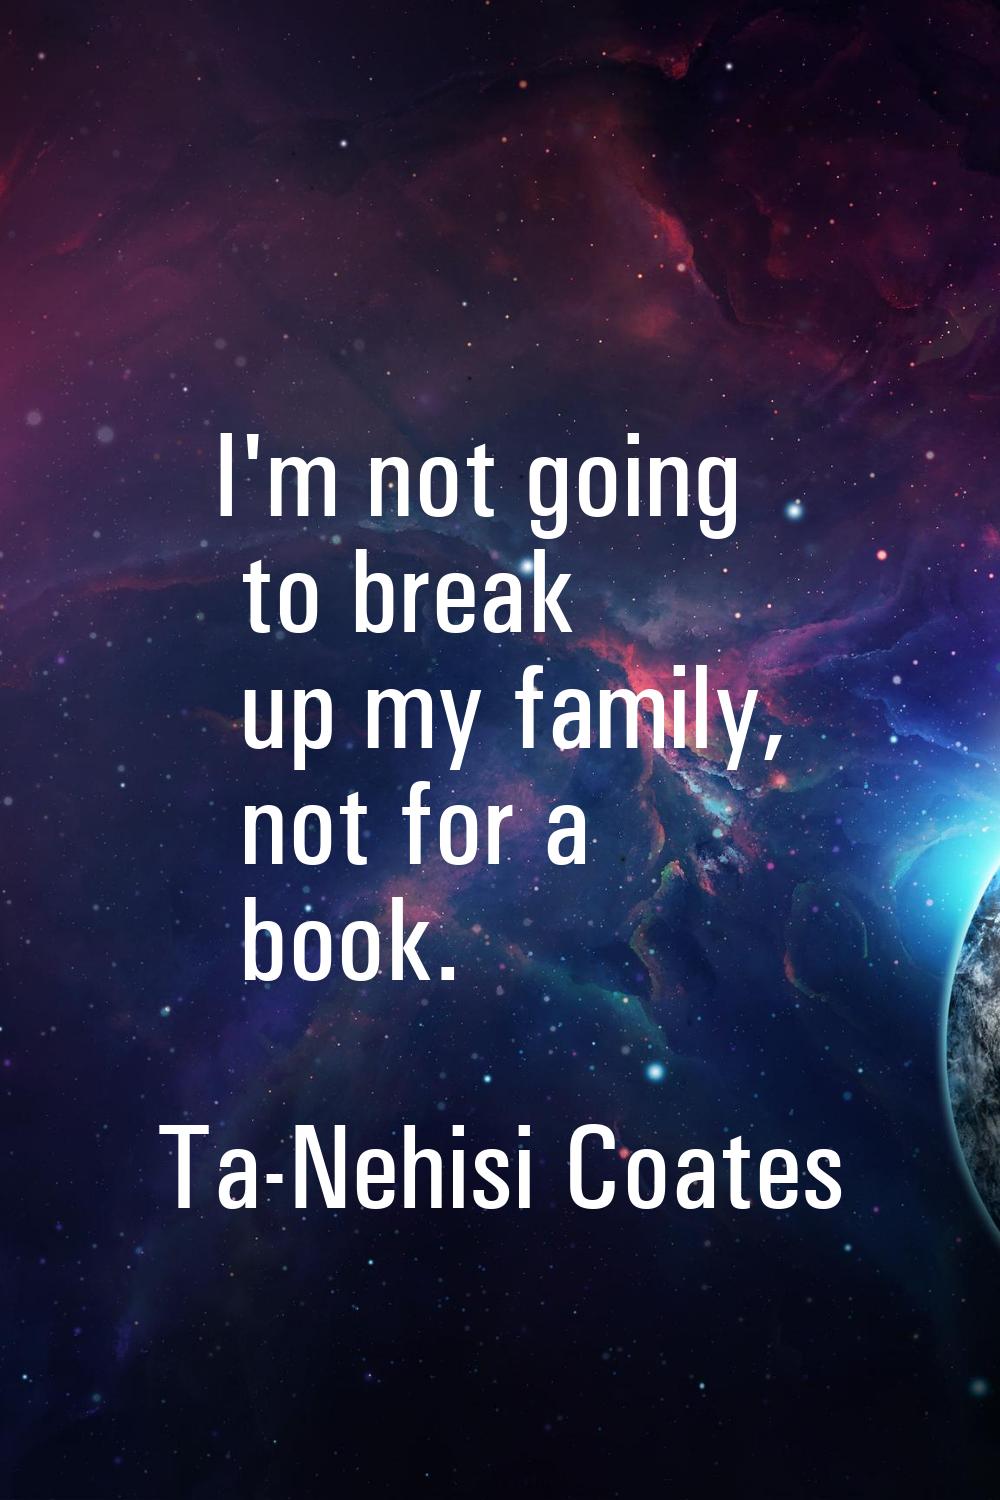 I'm not going to break up my family, not for a book.